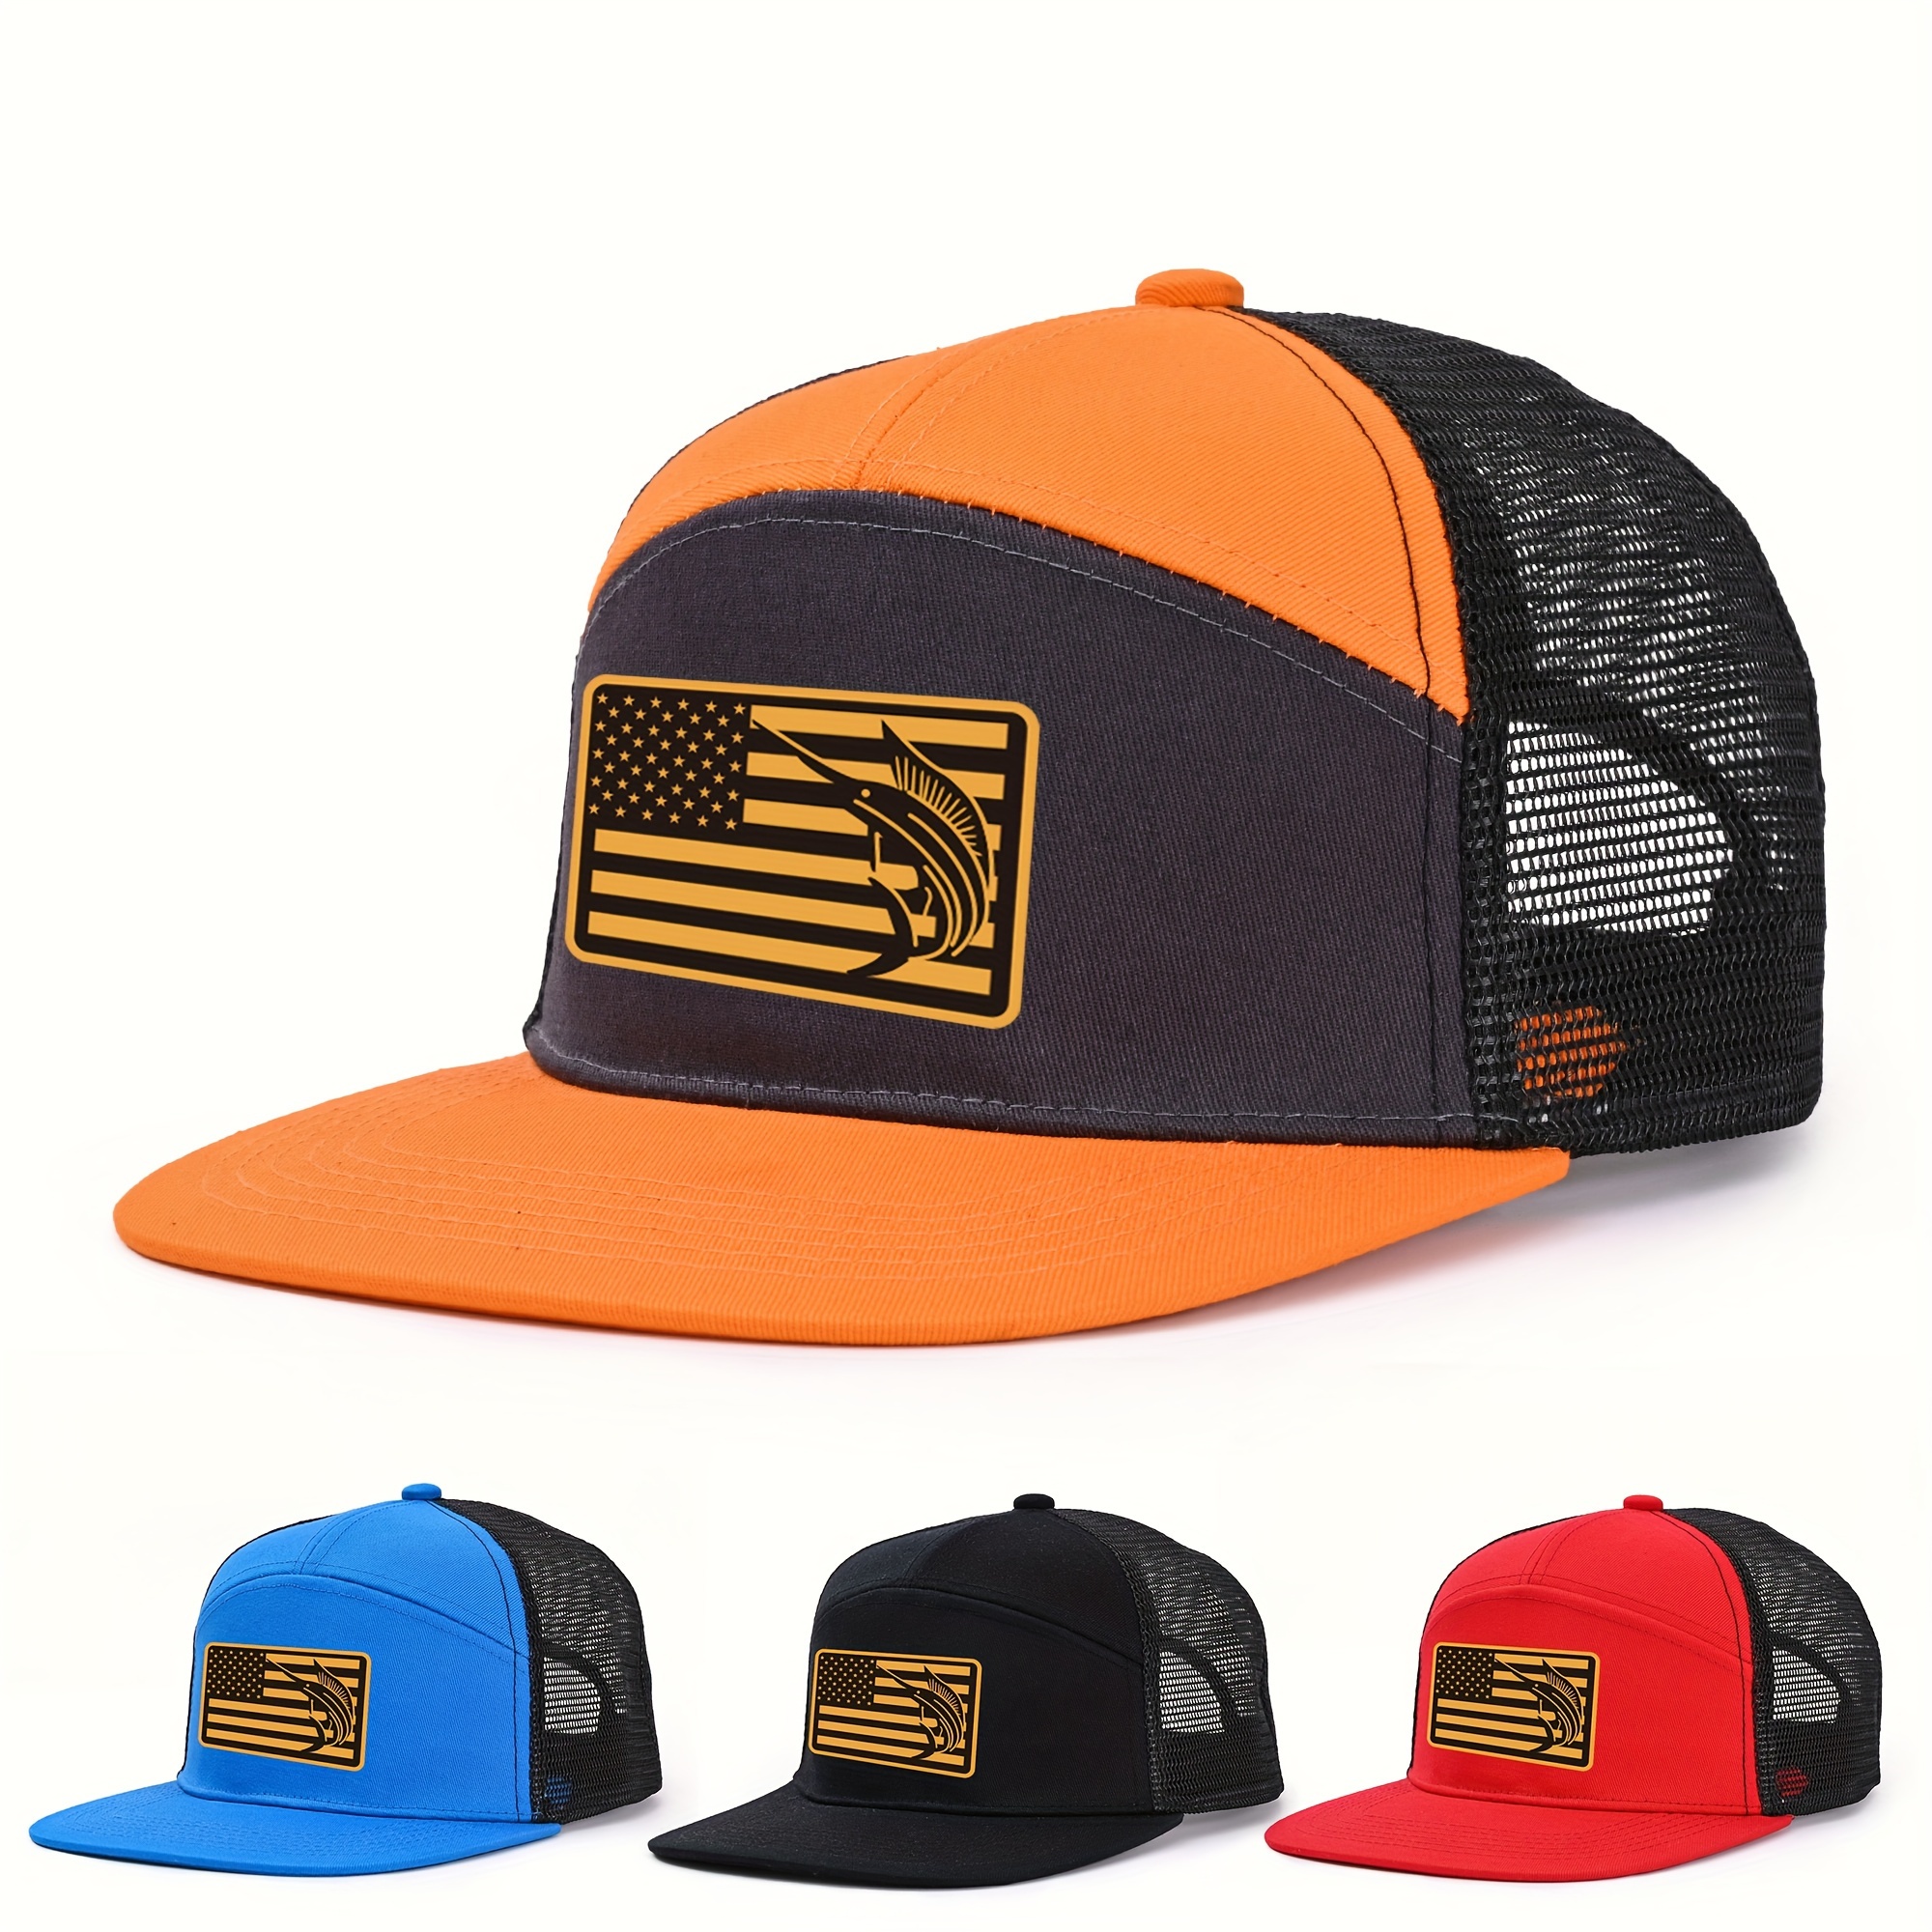 

1pc Flag Printed Baseball Cap With Breathable Mesh, Summer Casual Peaked Hat For Outdoor Sports And Leisure Time